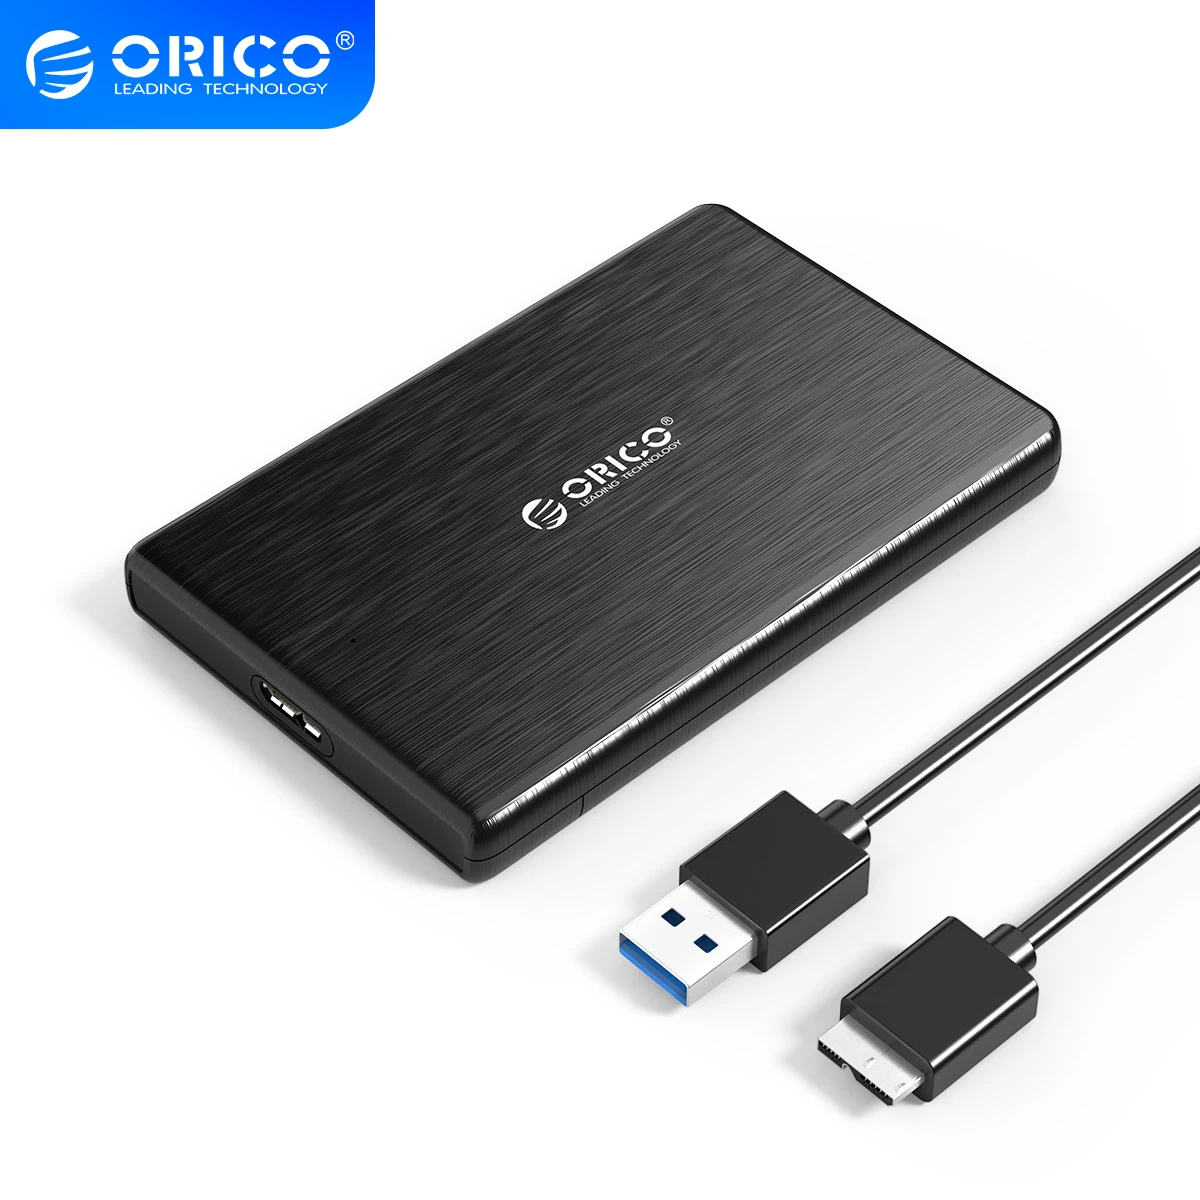 ORICO 2.5 SSD HDD SATA to USB 3.0 Hard Drive Enclosure for SSD Disk HDD Box Type C 3.1 Case Support UASP HD External Hard Disk ugreen 2 5 inch hdd ssd case usb c to sata iii hdd enclosure caddy portable case for external hard drive ssd case support 10tb